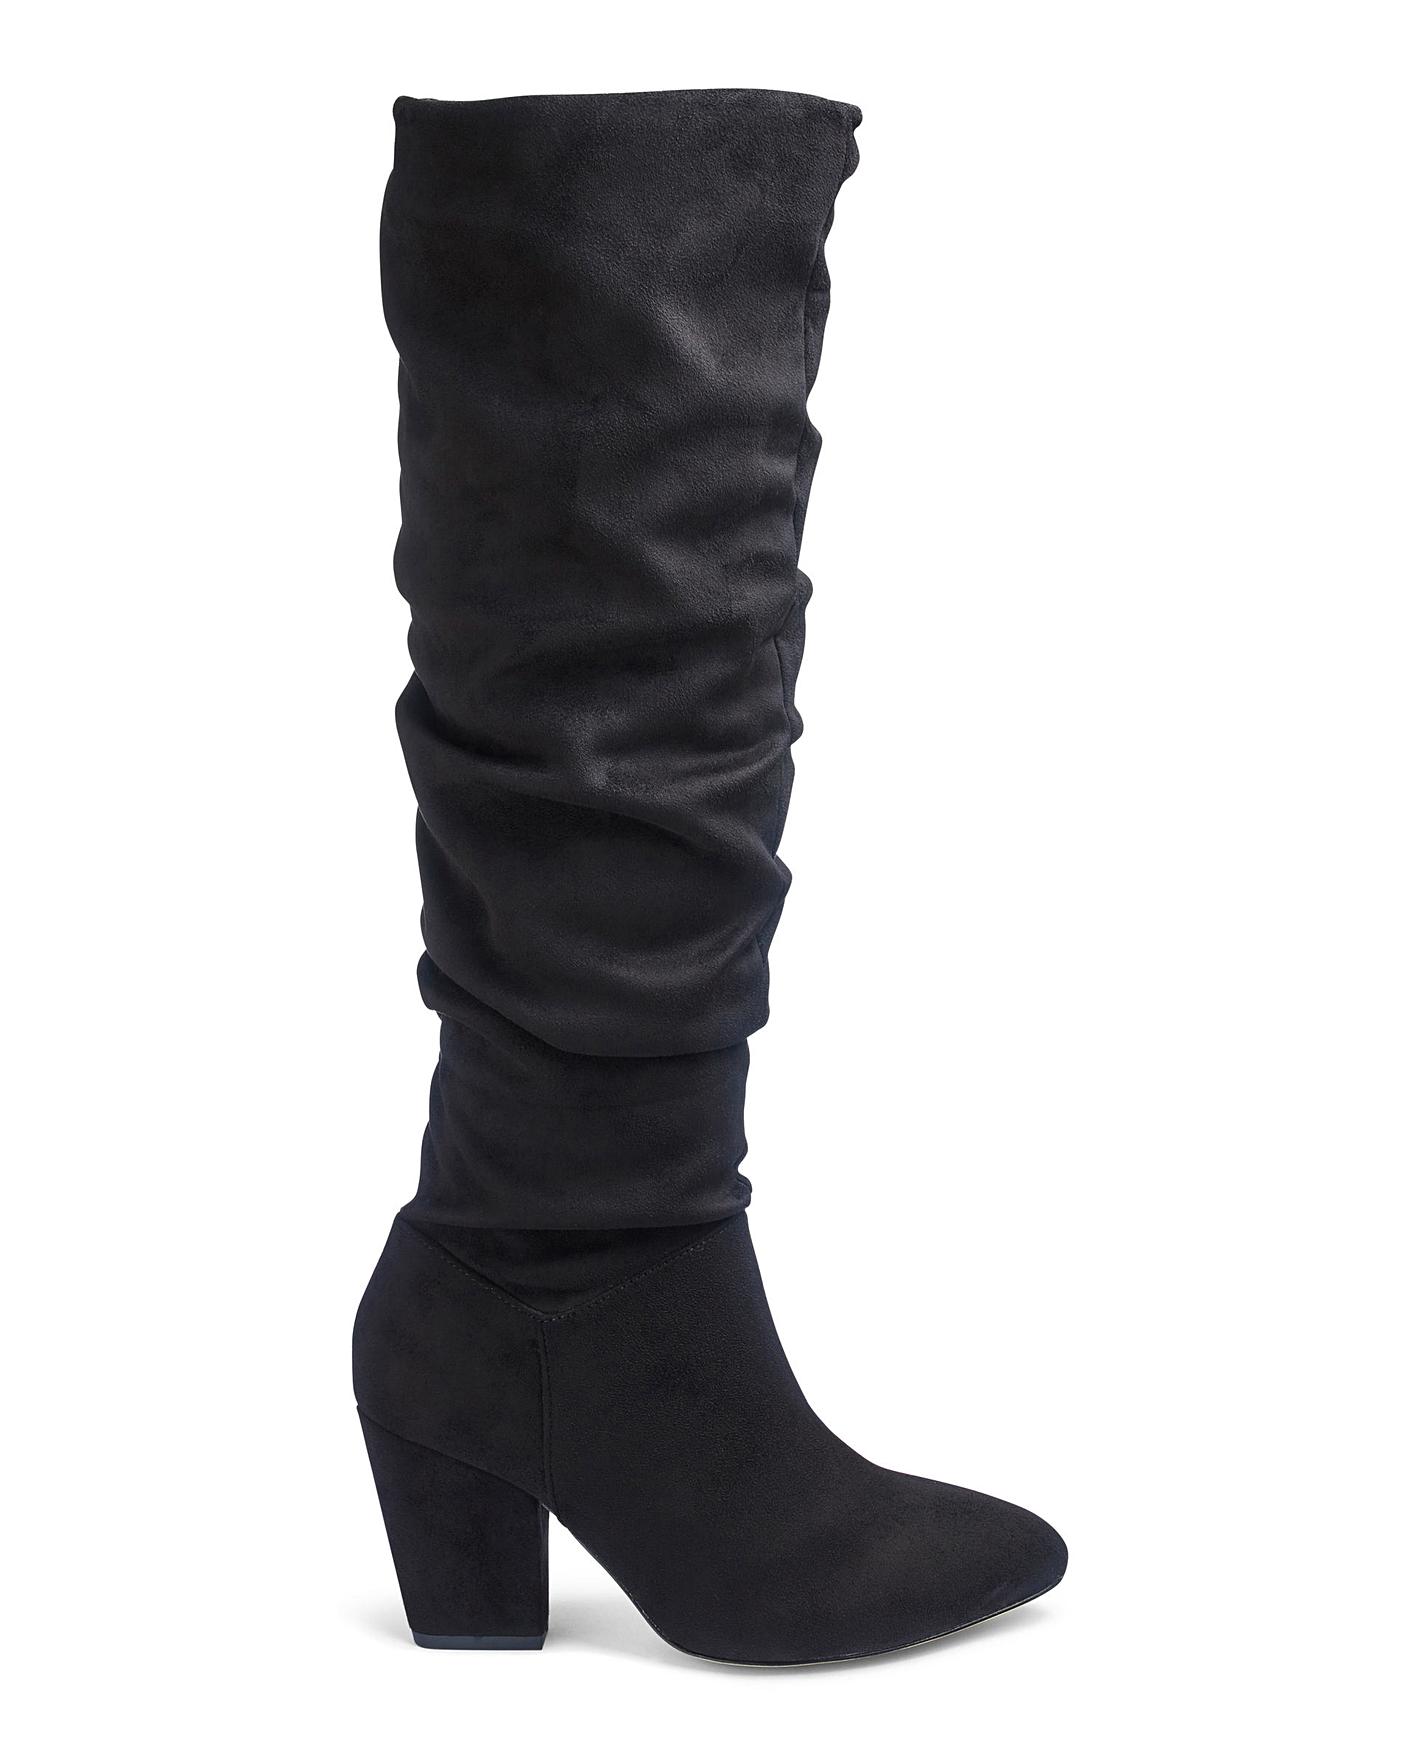 Soft Ruched Boots EEE Standard Calf | Simply Be